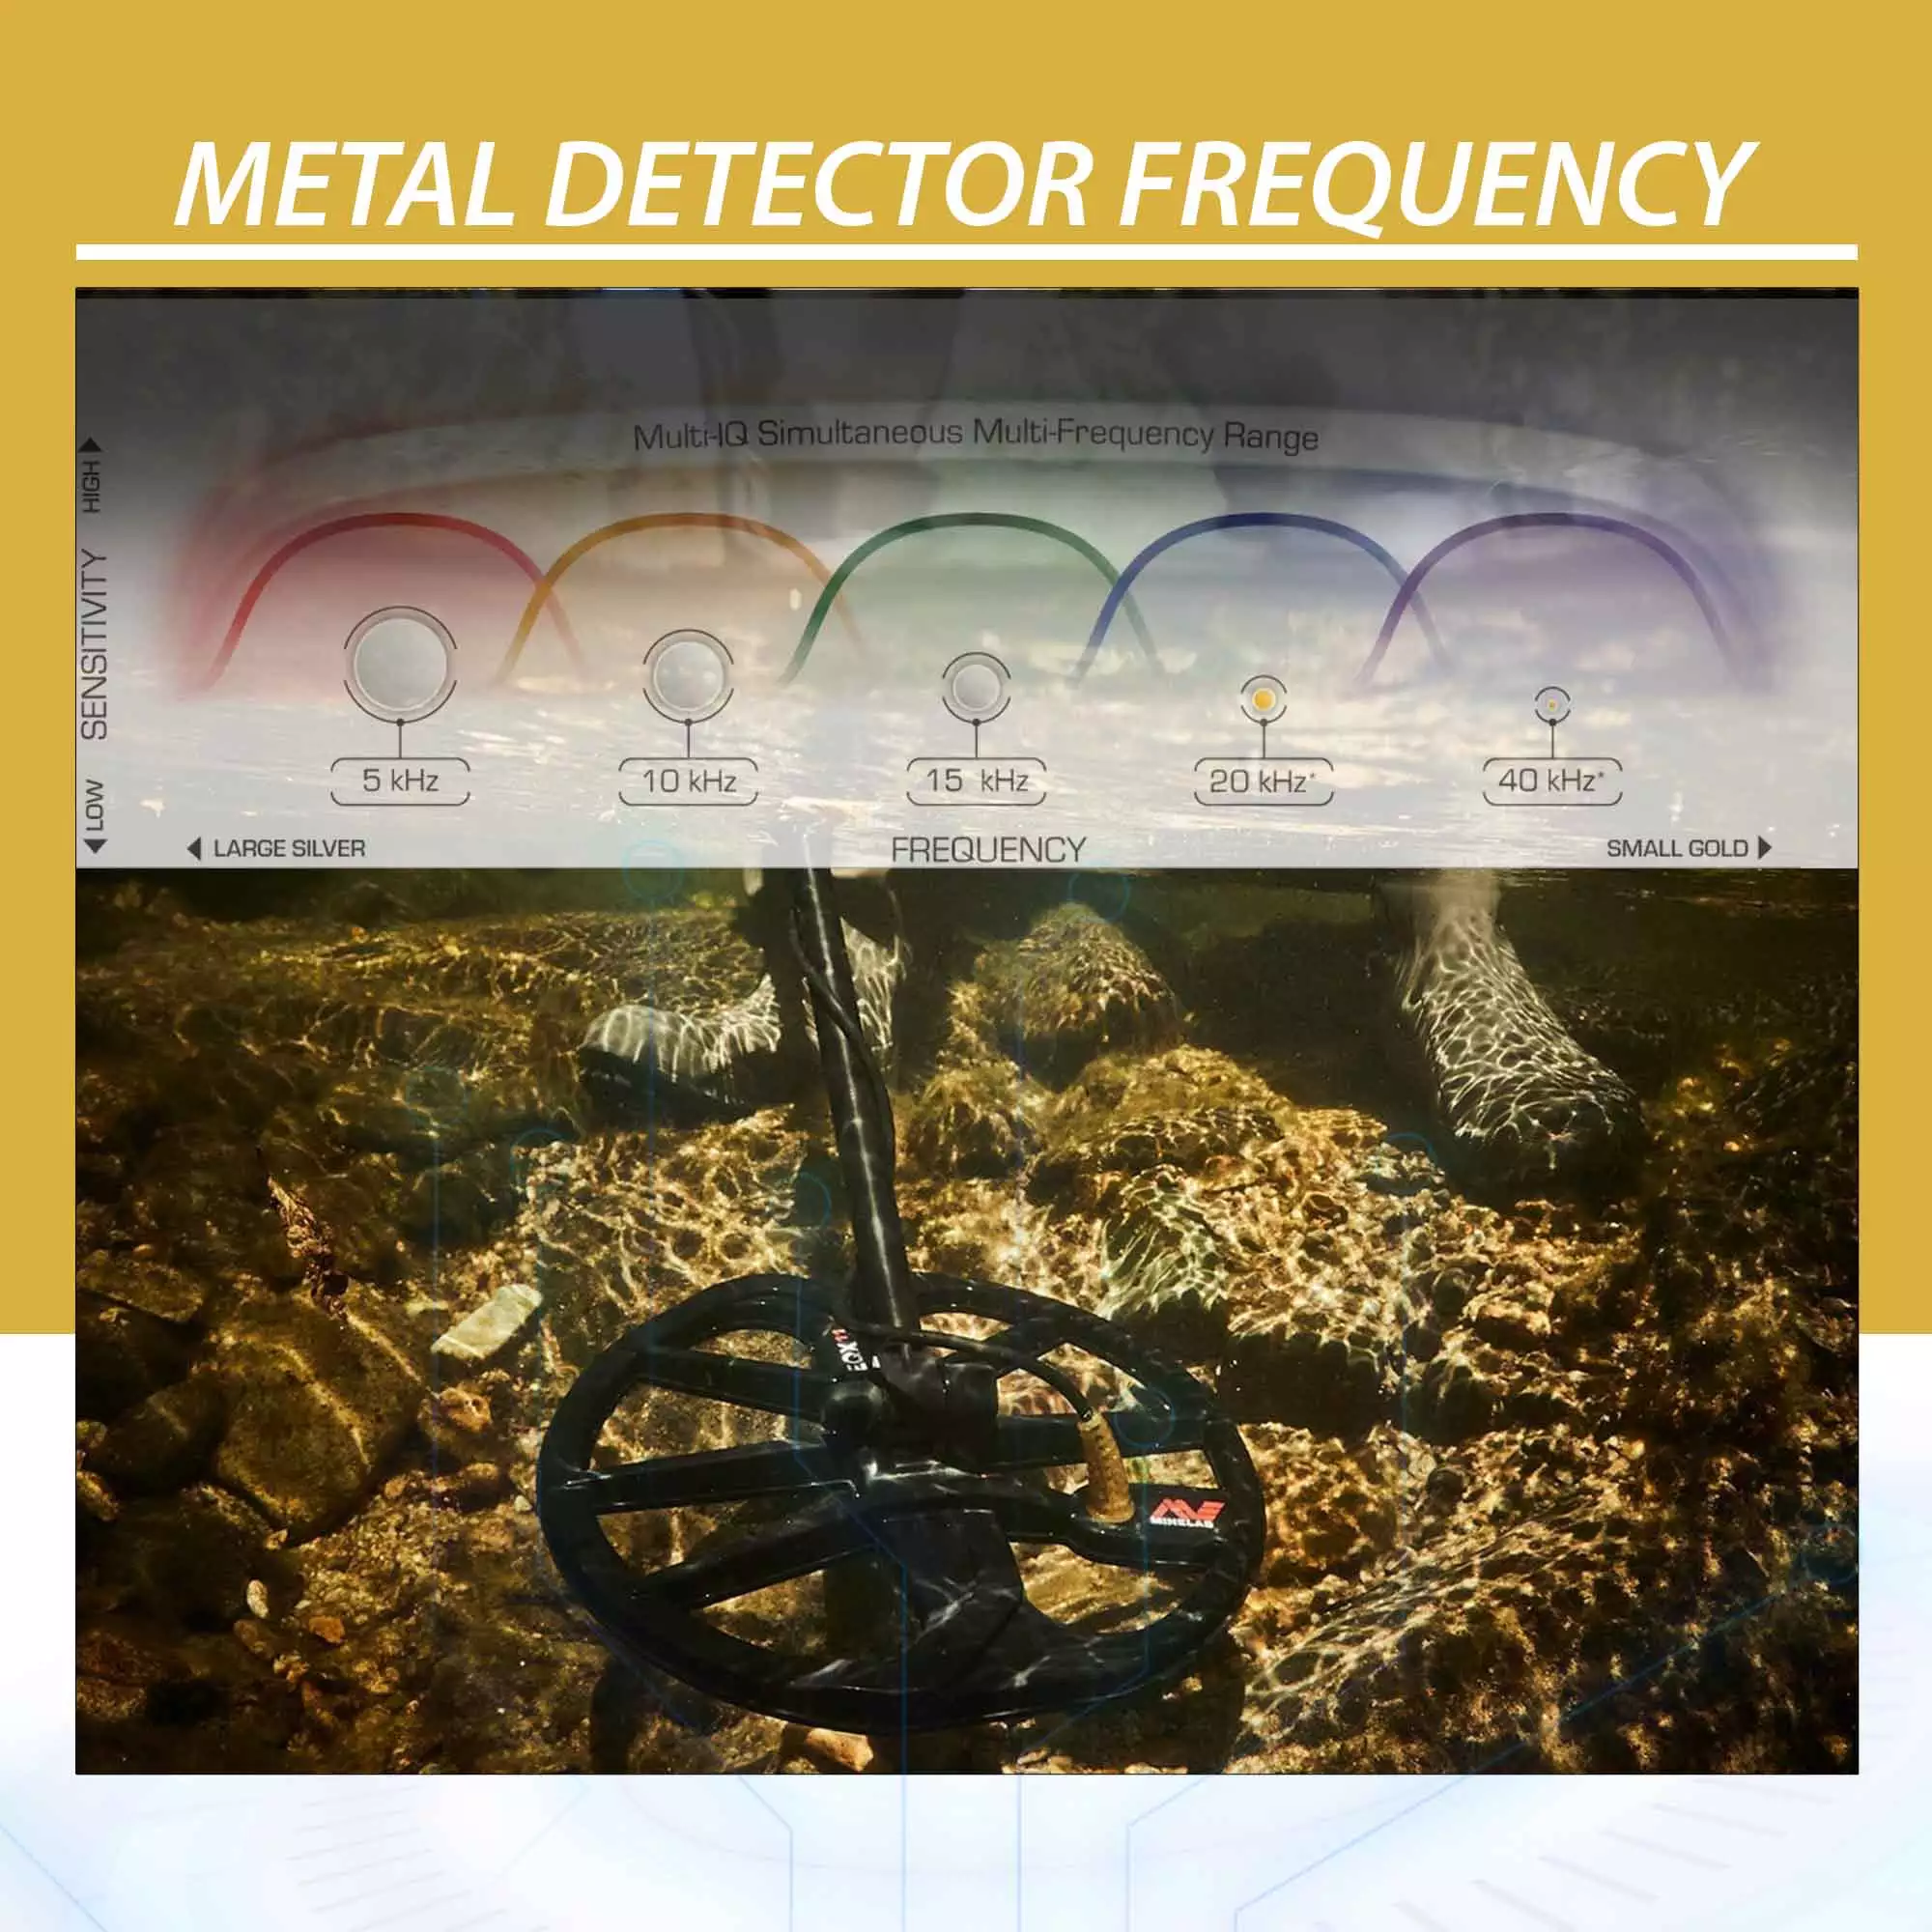 Metal Detector Frequency